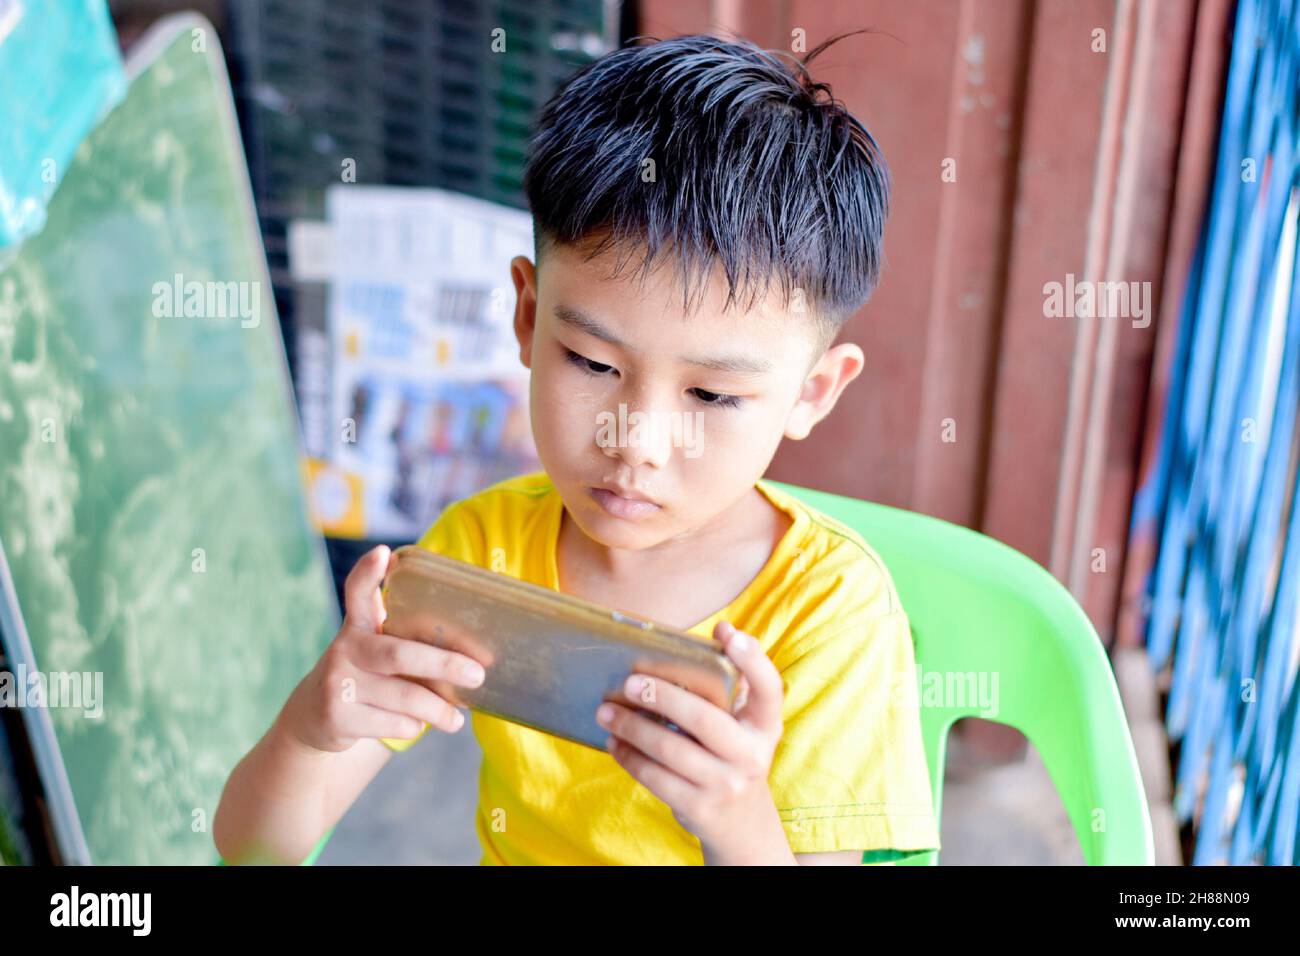 Asian child with squint eyes playing mobile game with smartphone. Concept of eye strain, screen addiction and excessive screen time. Stock Photo